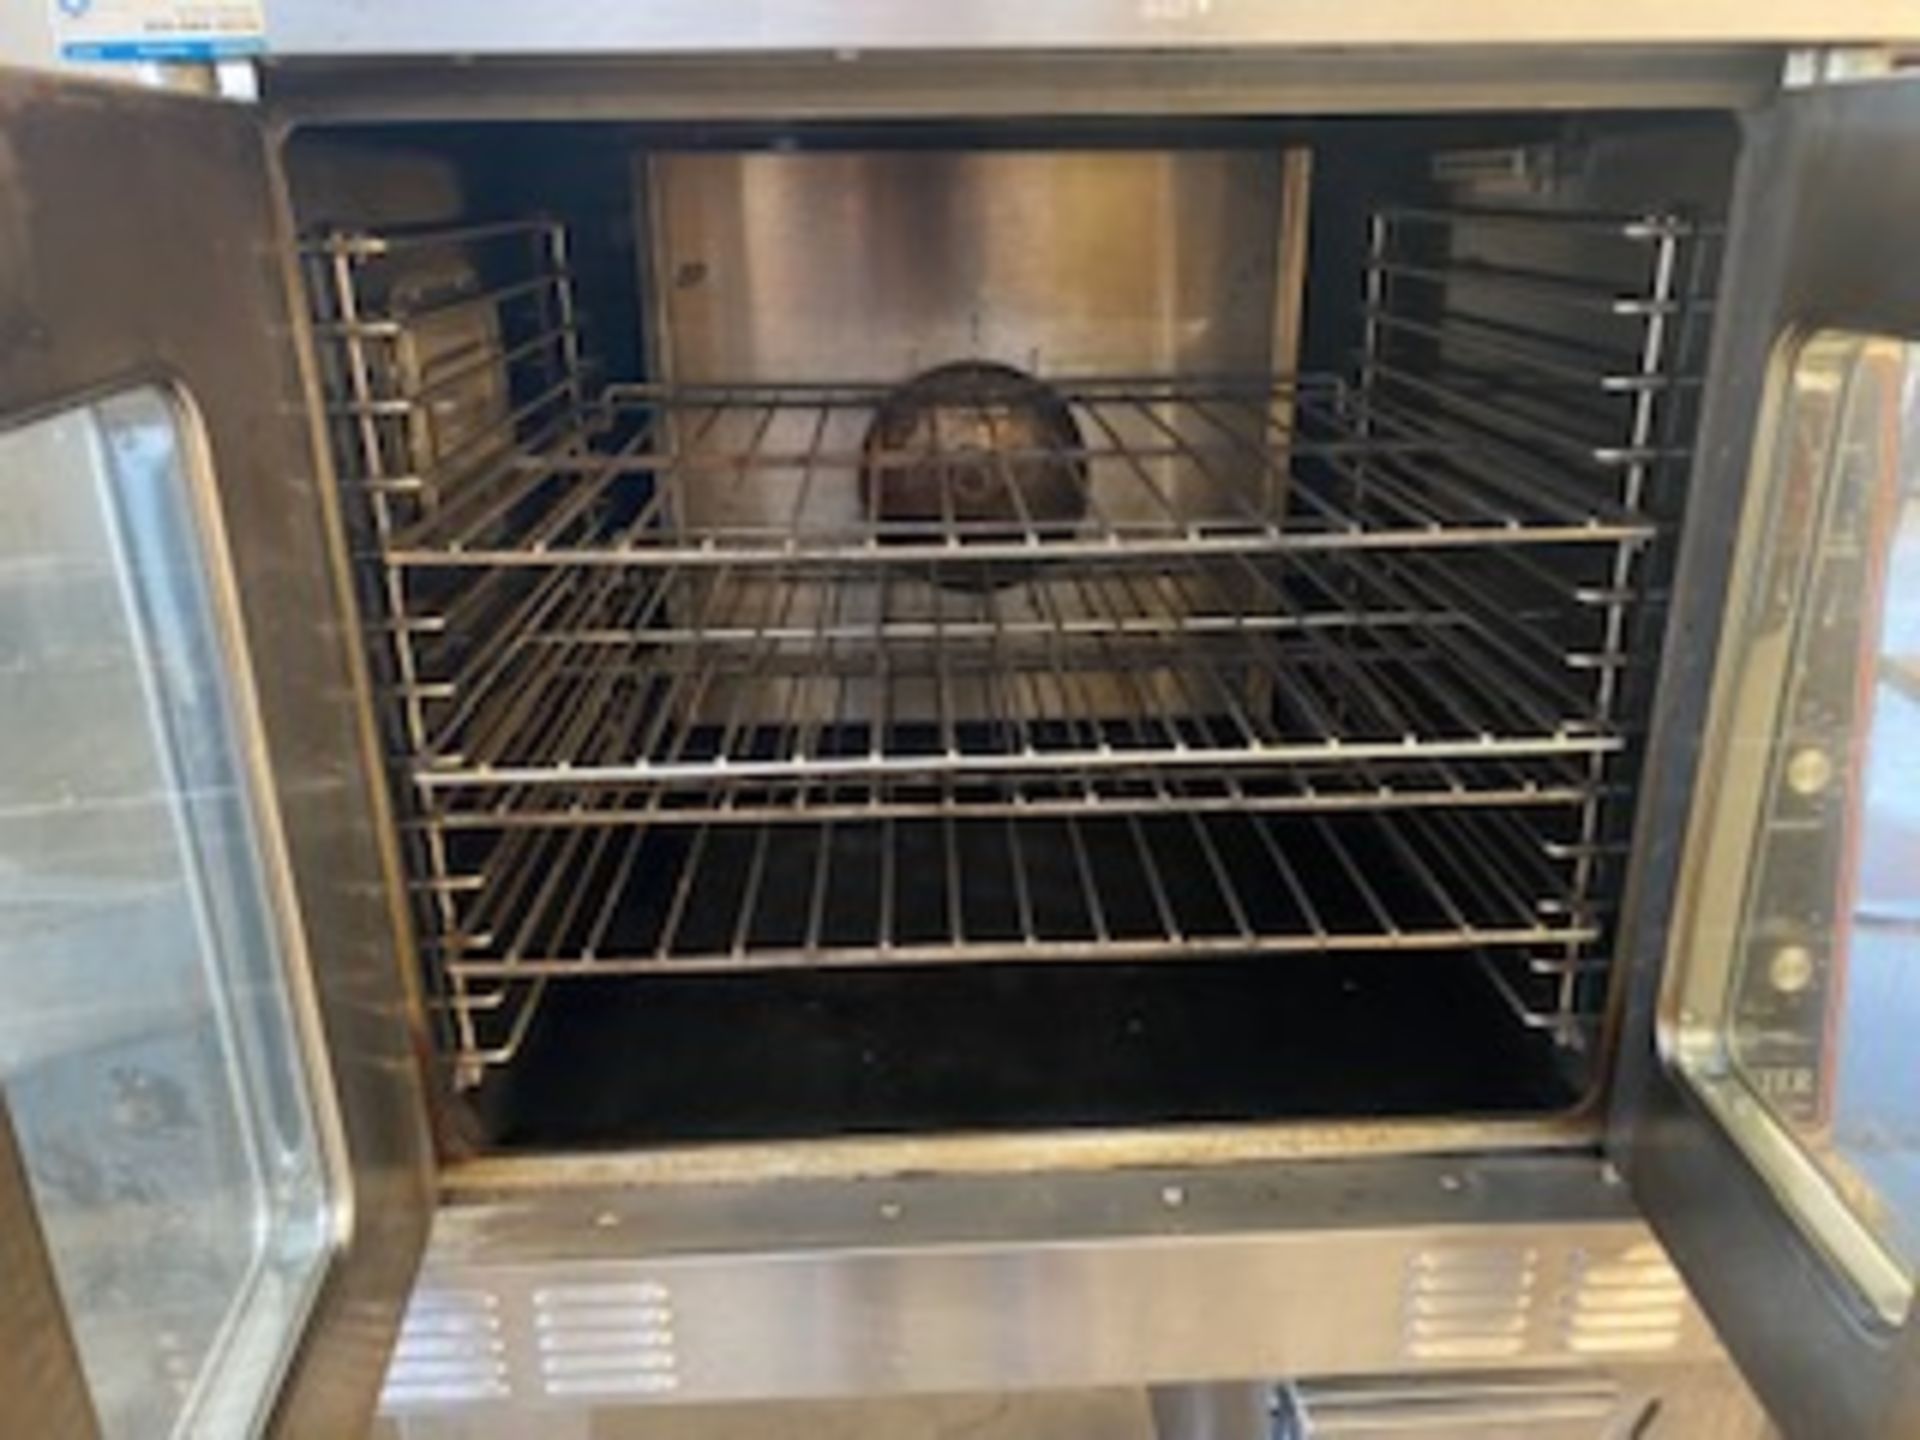 Garland master 200 oven in single or 3 ph, currently set up for 3 phase - Image 3 of 4